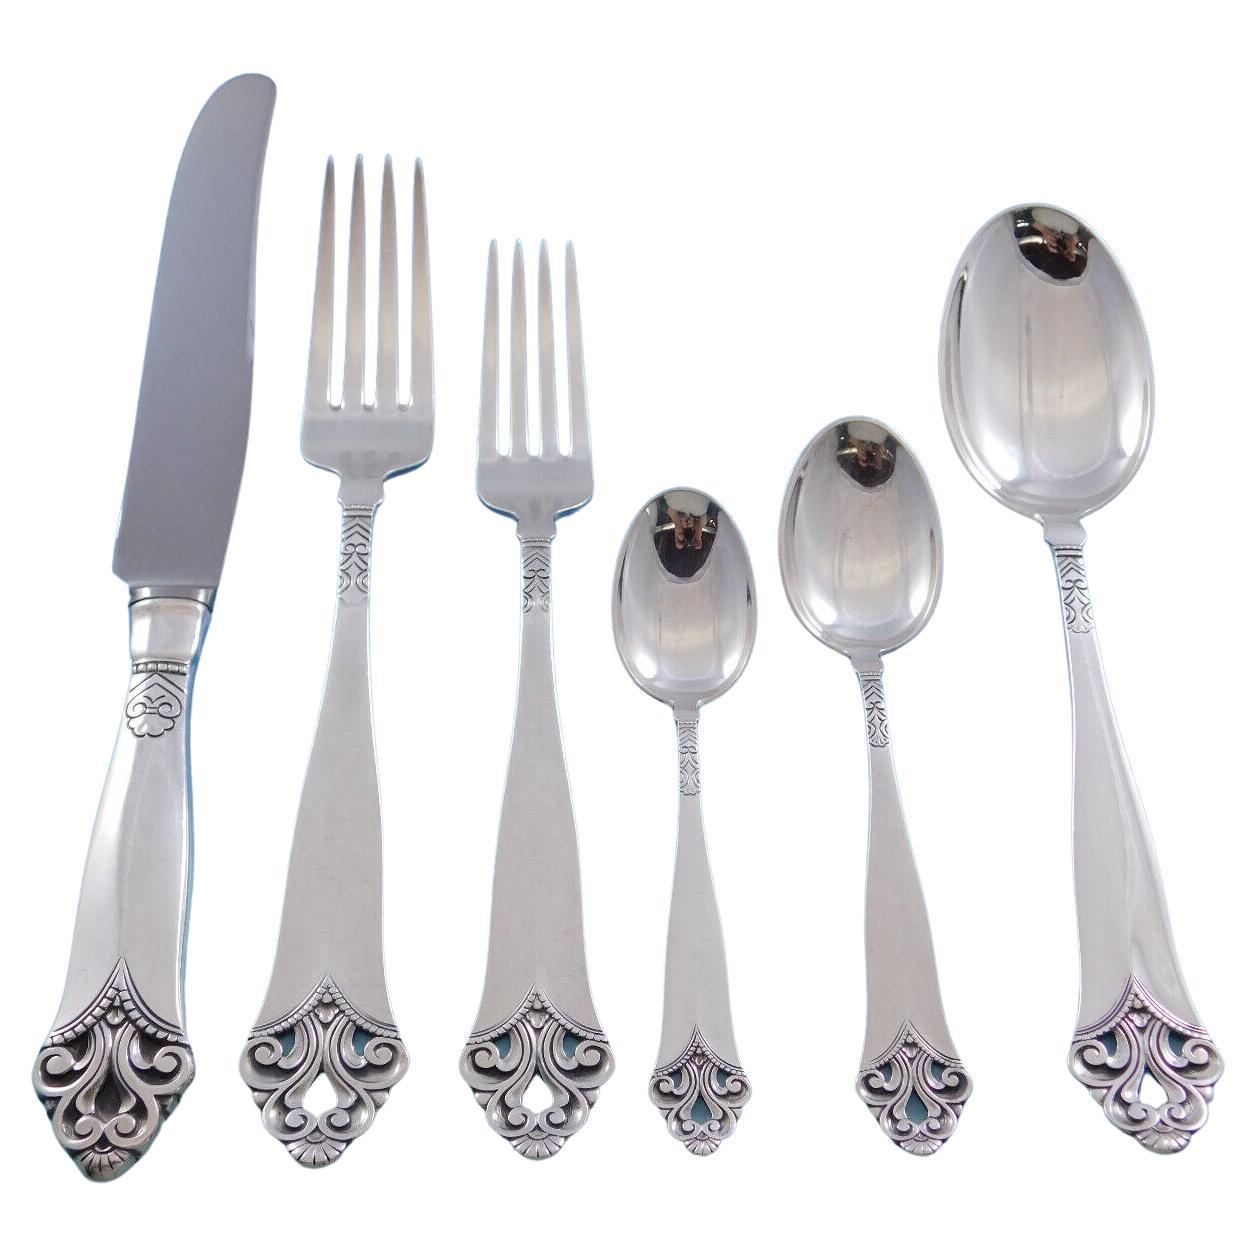 Lillemor by Marthinsen 830s Silver Flatware Service for 12 Dinner Set 74 Pieces For Sale